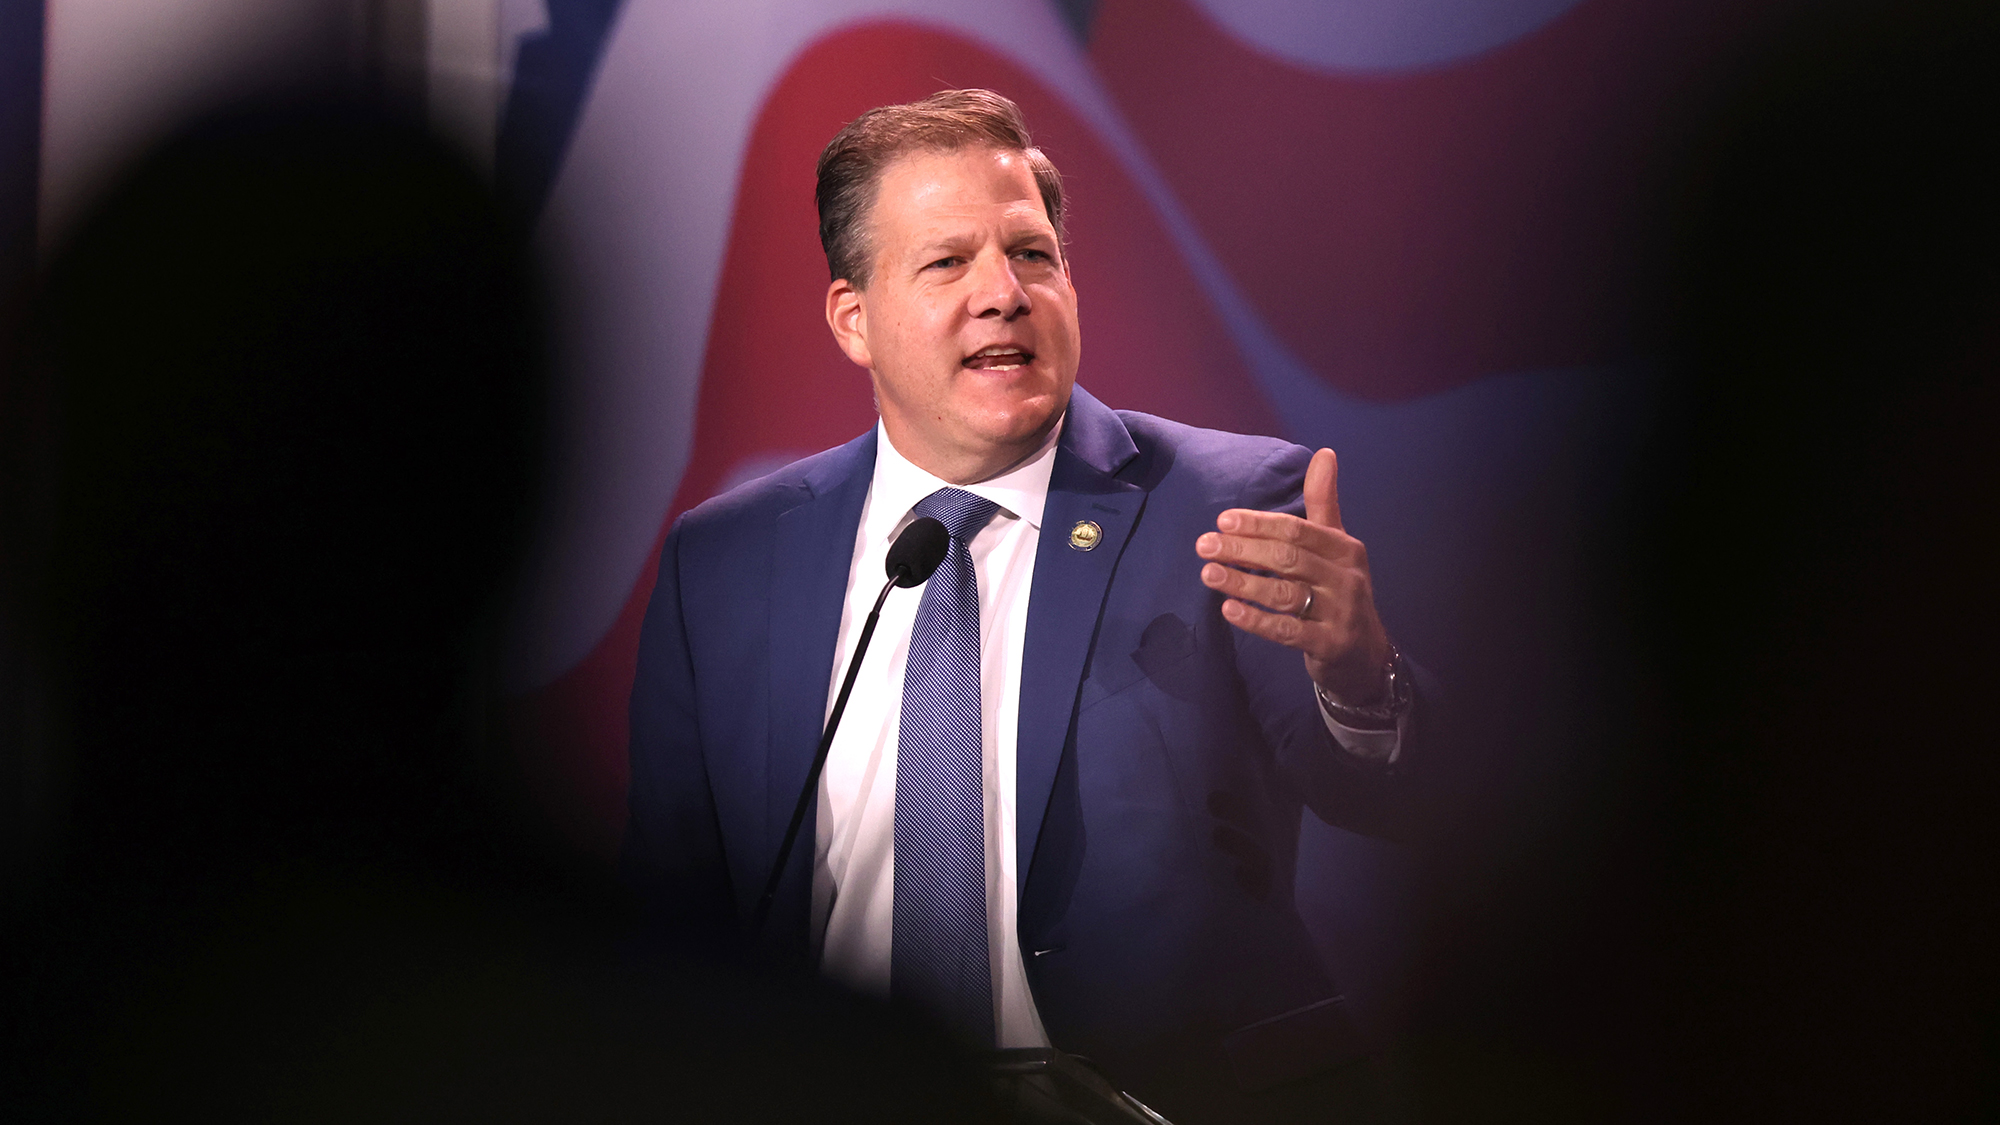 Potential GOP presidential hopeful Sununu: Trump shouldn’t be 2024 nominee, but indictment bolsters his base